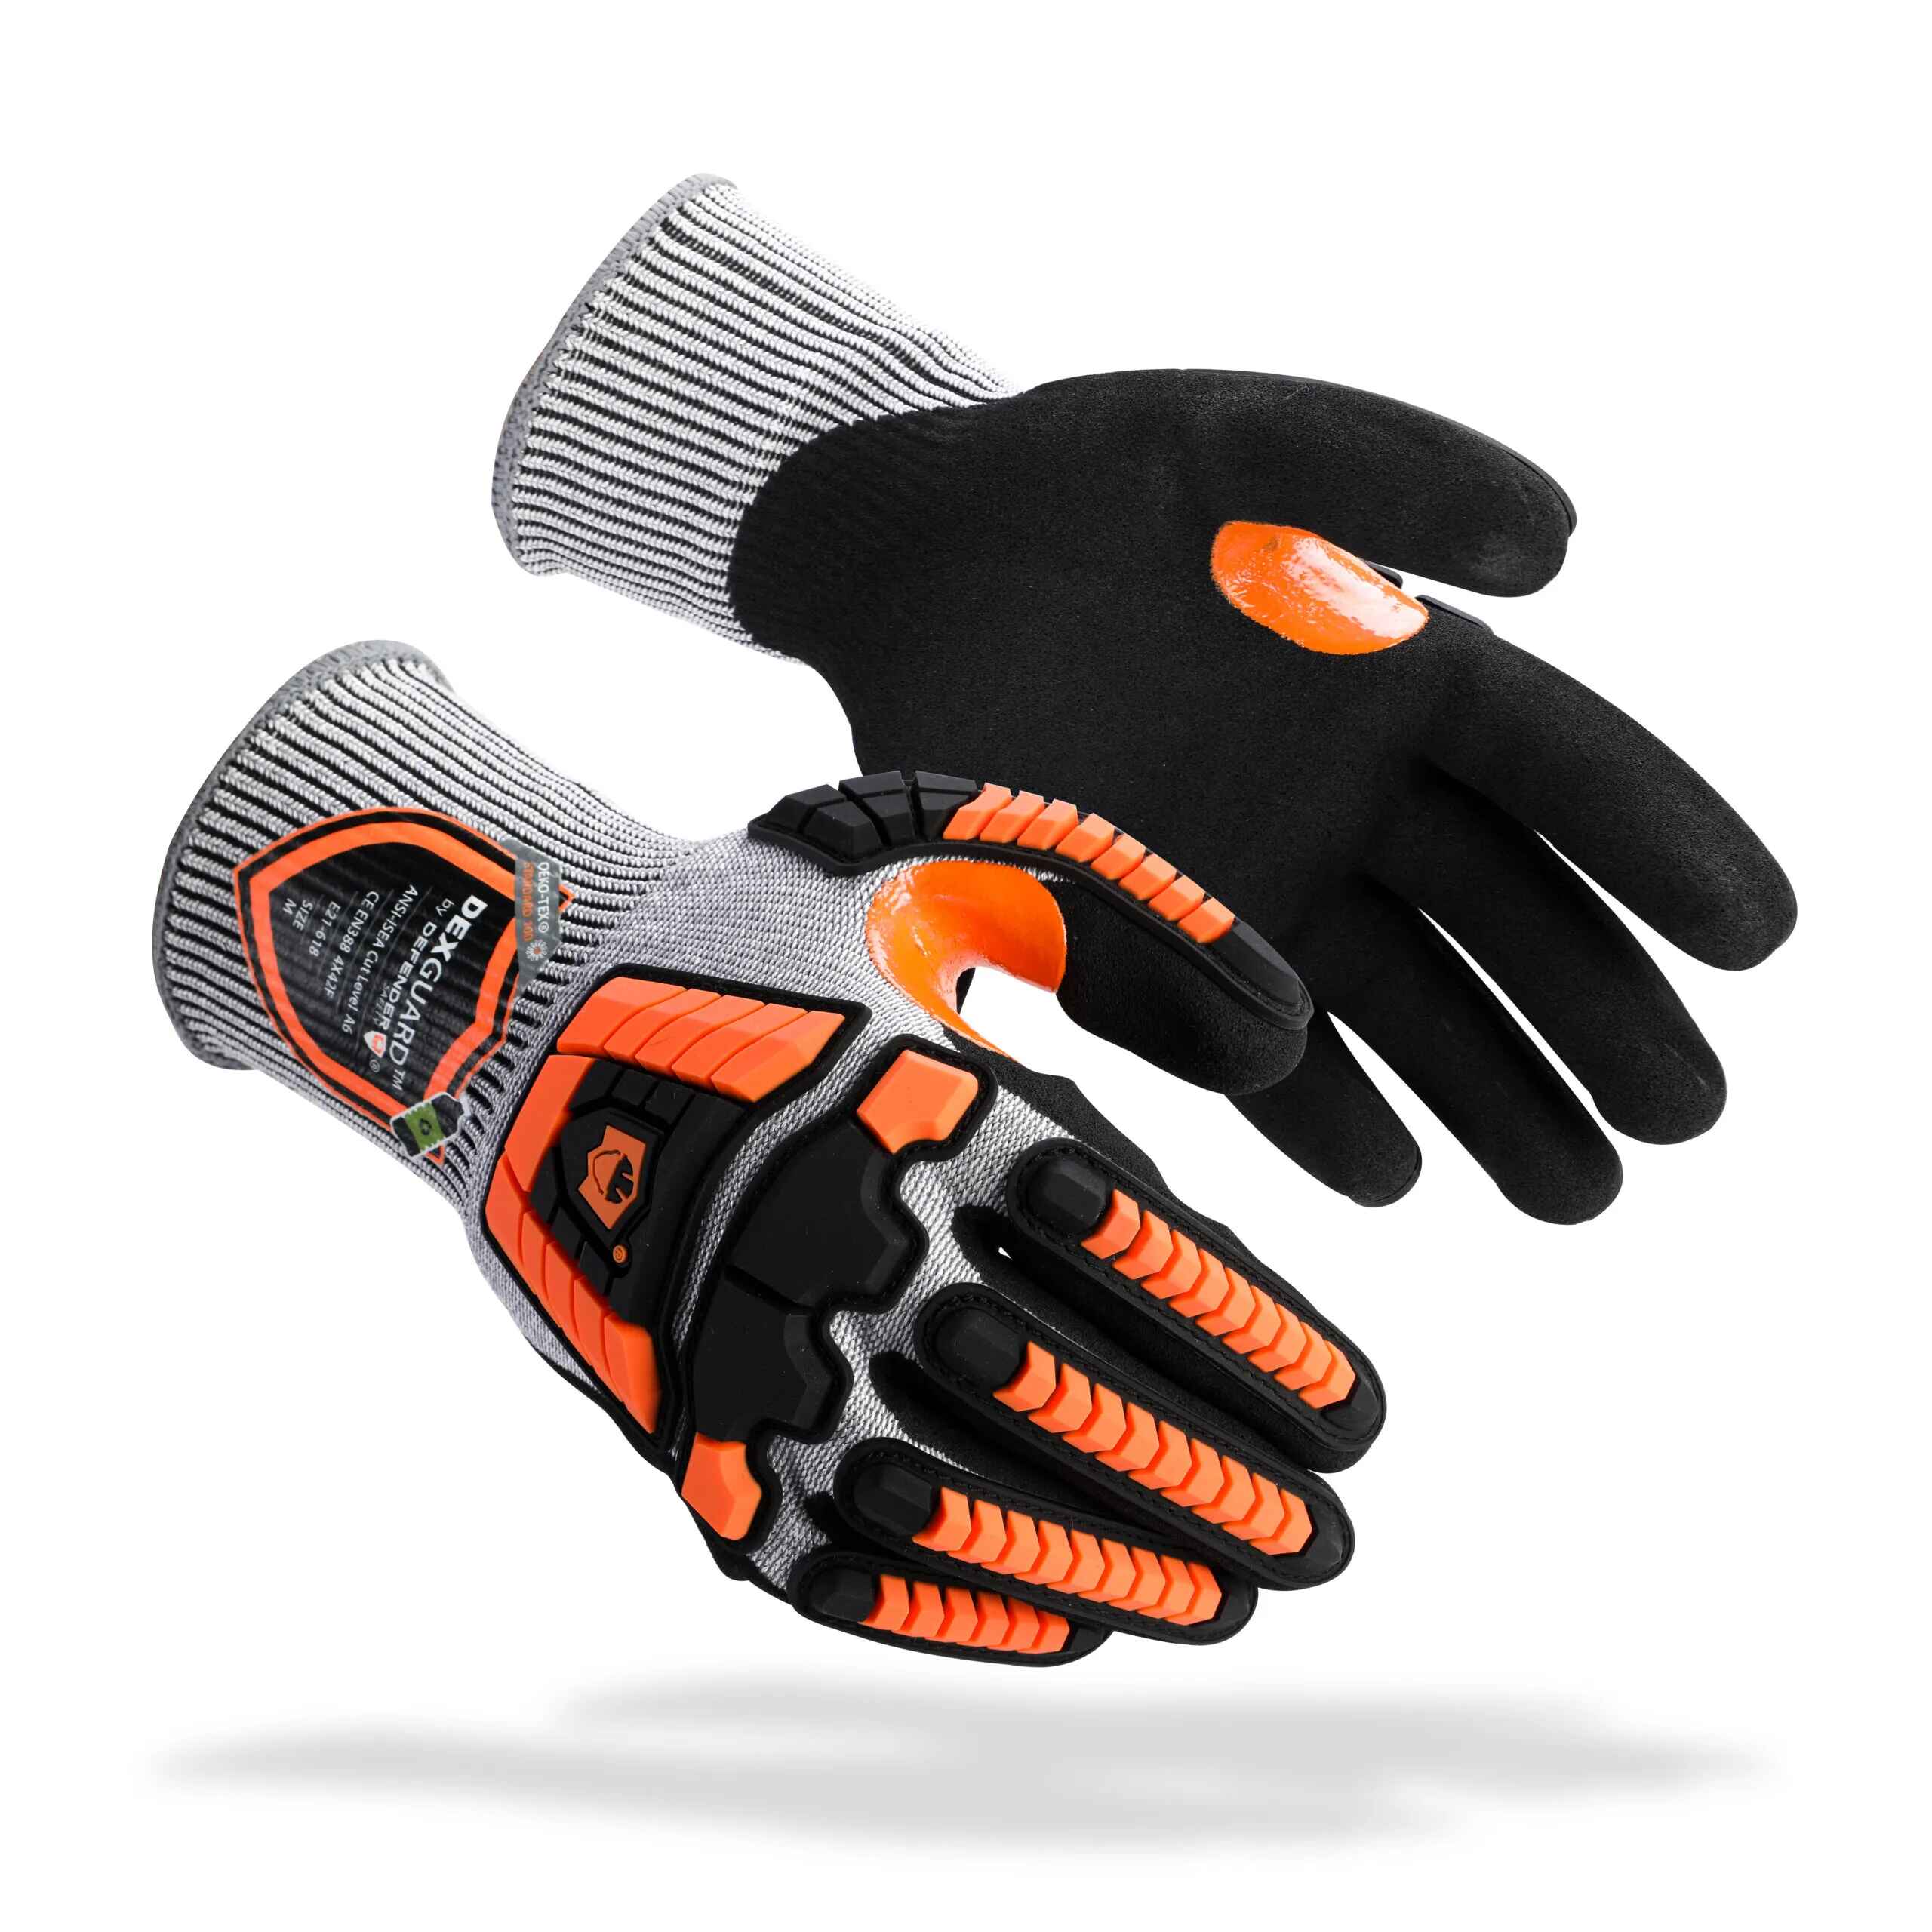 DEXGUARD™ A6 Cut Gloves, 13G Liner, Back of the Hand Impact Resistant,  Level 4 Abrasion Resistant, Textured Nitrile Coating.